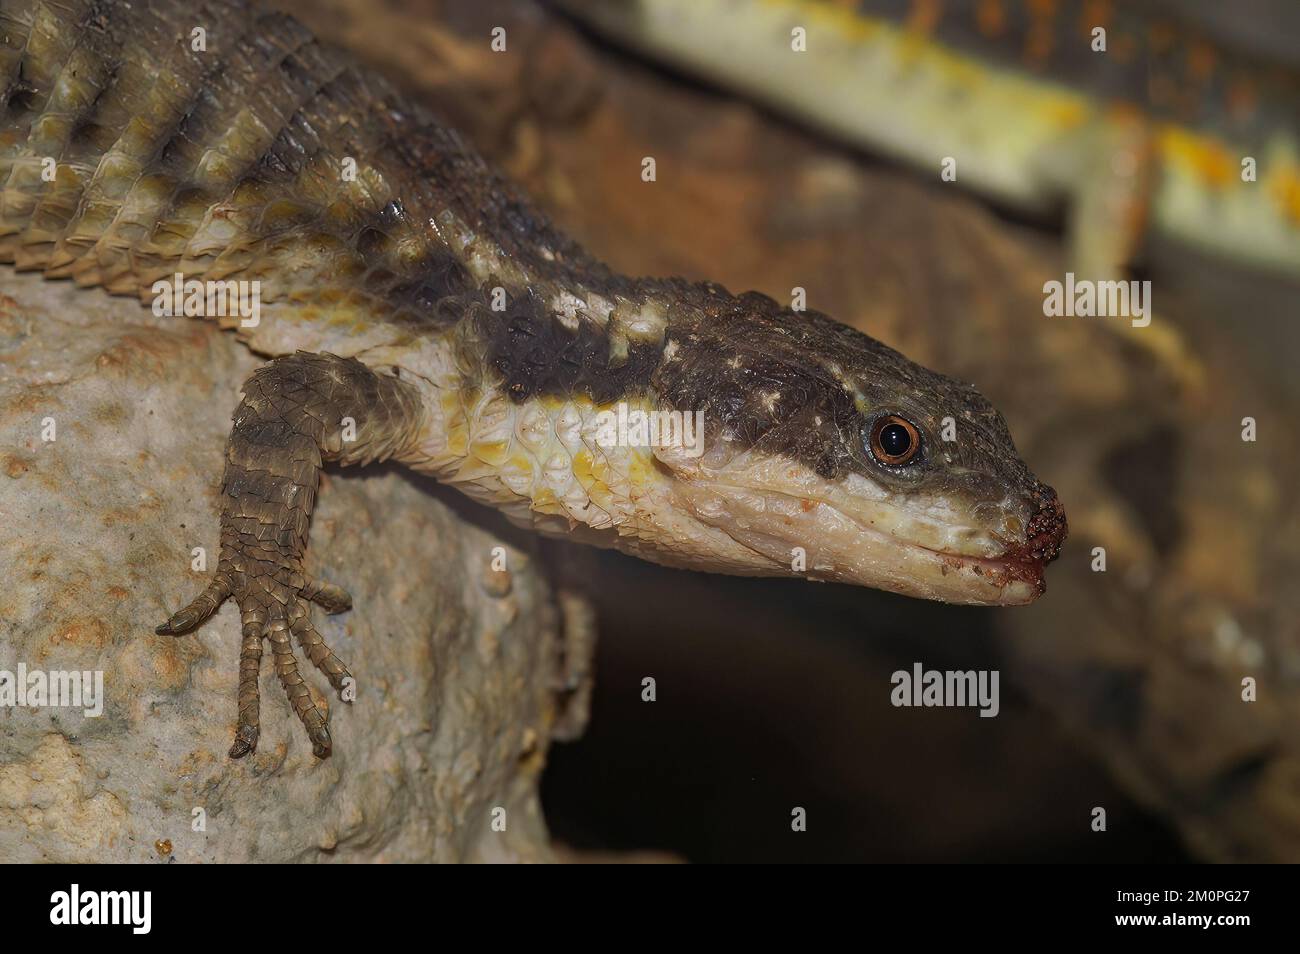 A closeup of an East African spiny-tailed lizard on rocks in a zoo with a blurry background Stock Photo